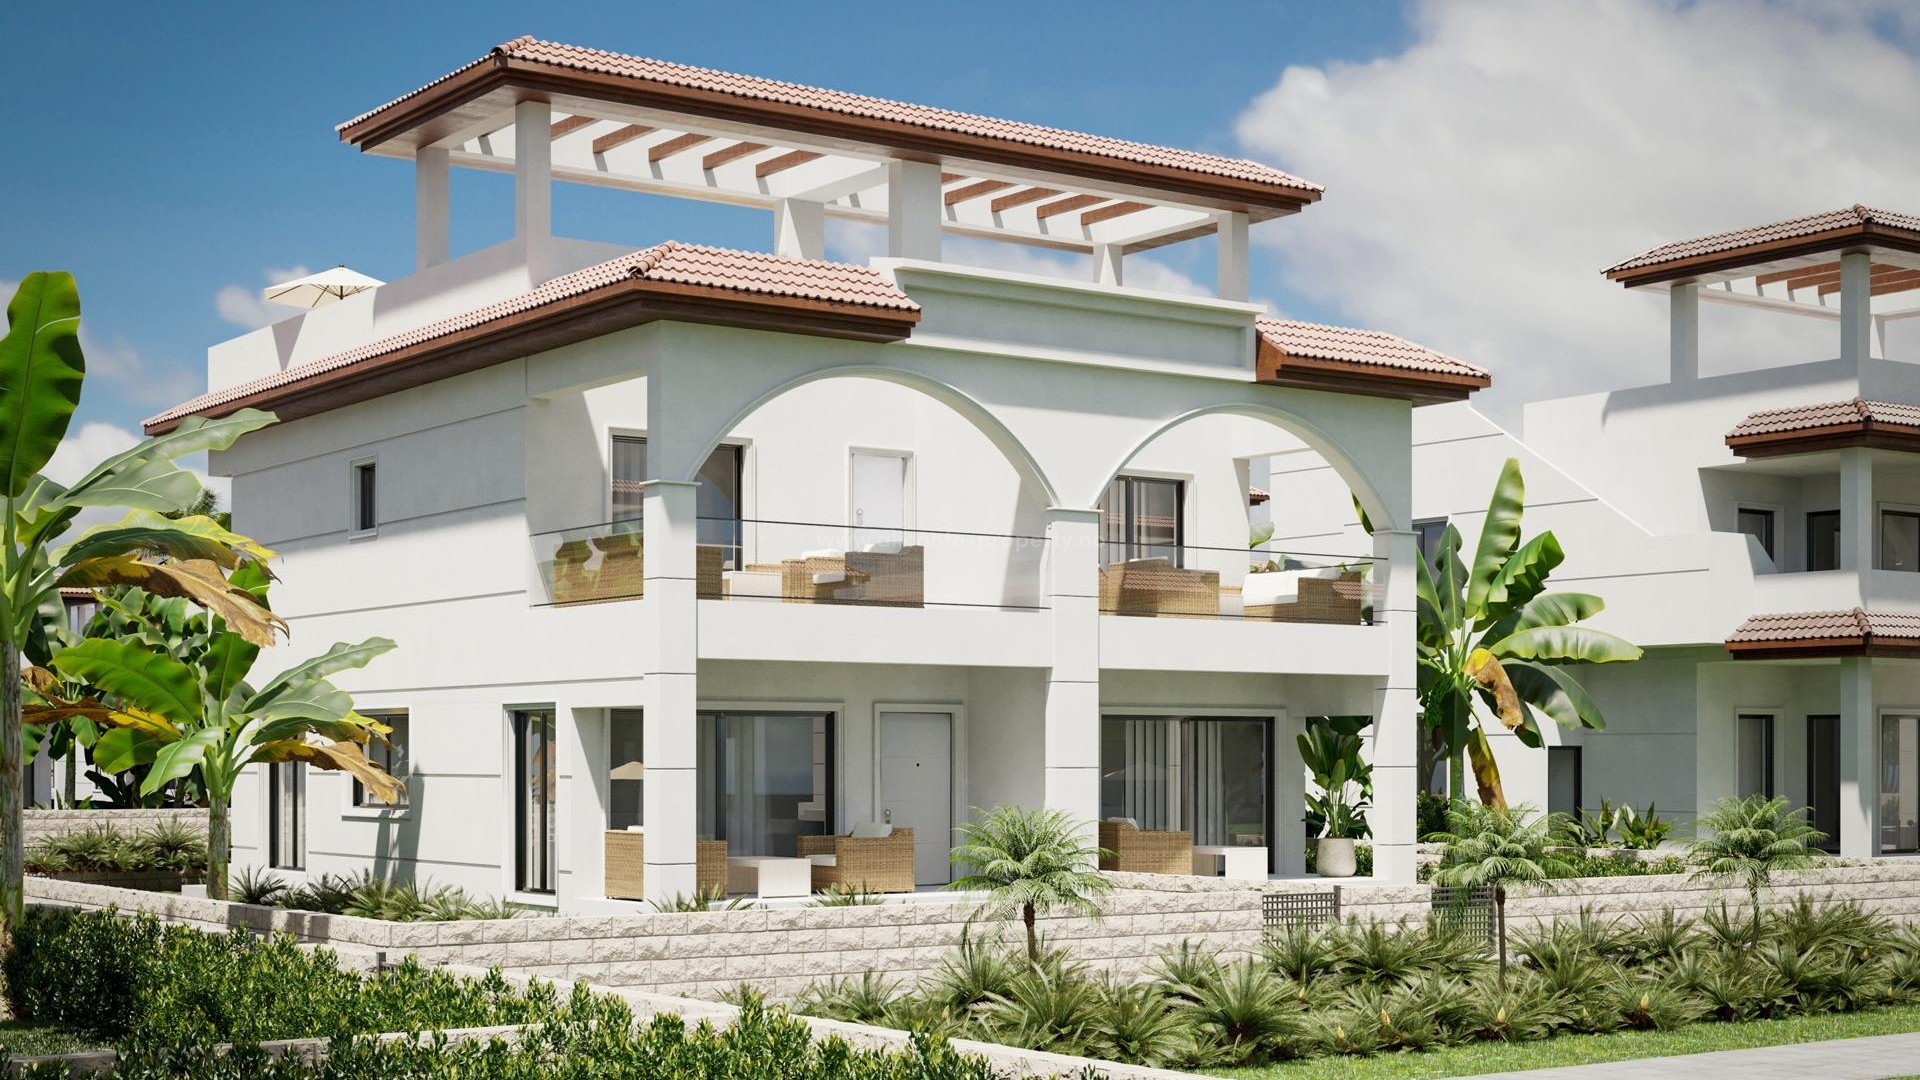 Bungalow apartments and townhouses in Rojales, 2/3 bedrooms, 2/3 bathrooms, terraces, private garden and solarium green common areas, swimming pool and private parking